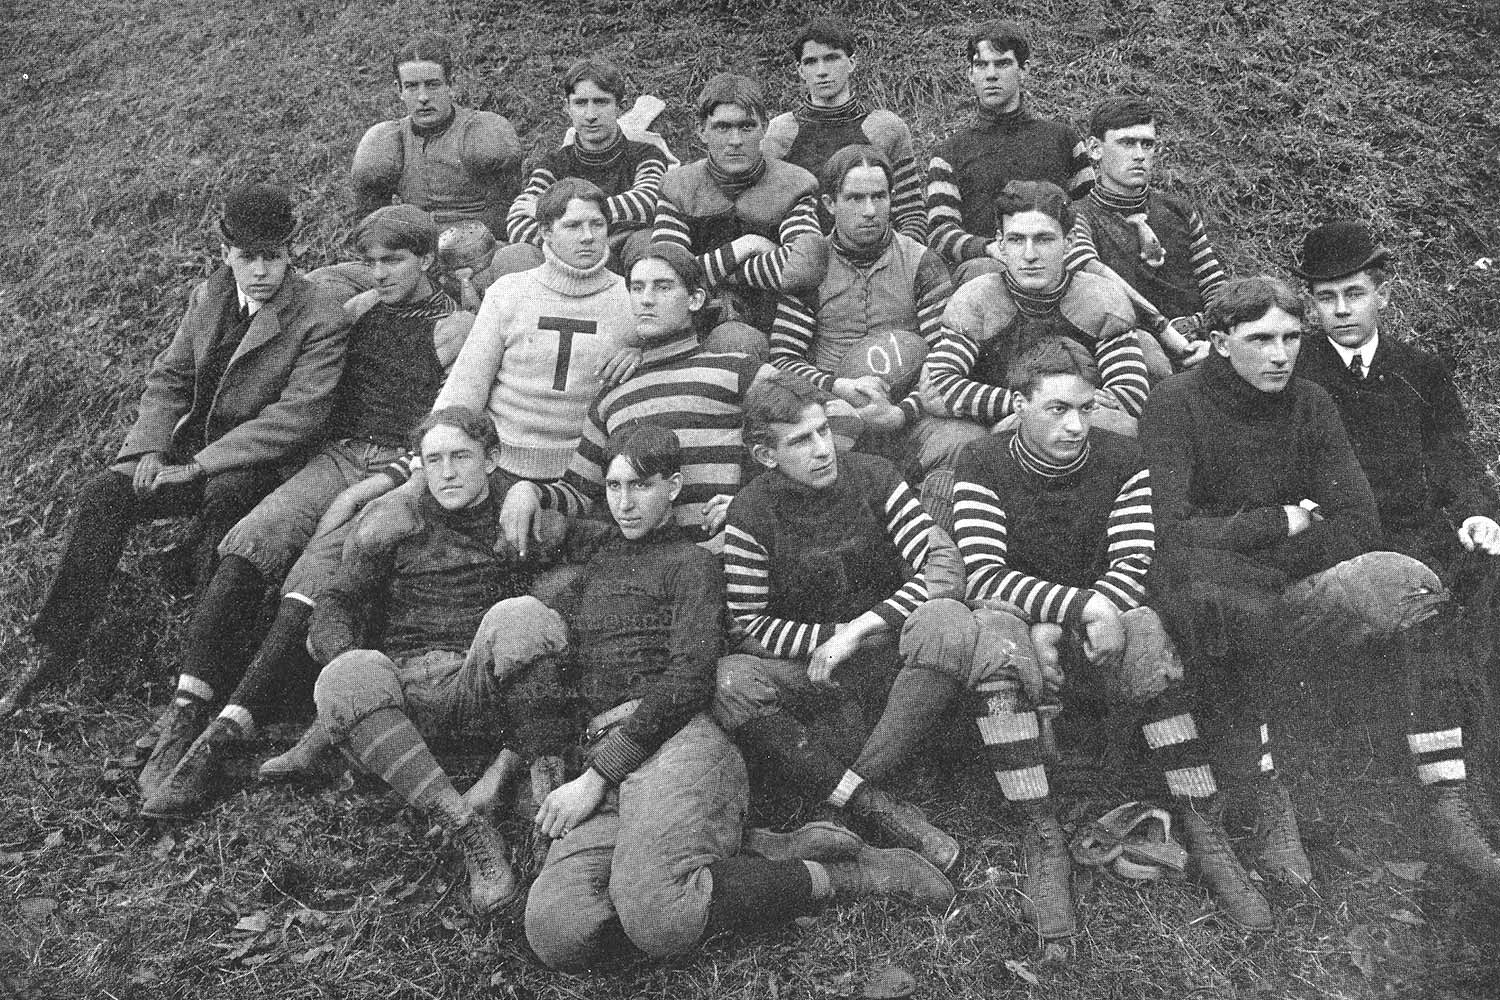 The 1901 football team shown in the 1902 yearbook